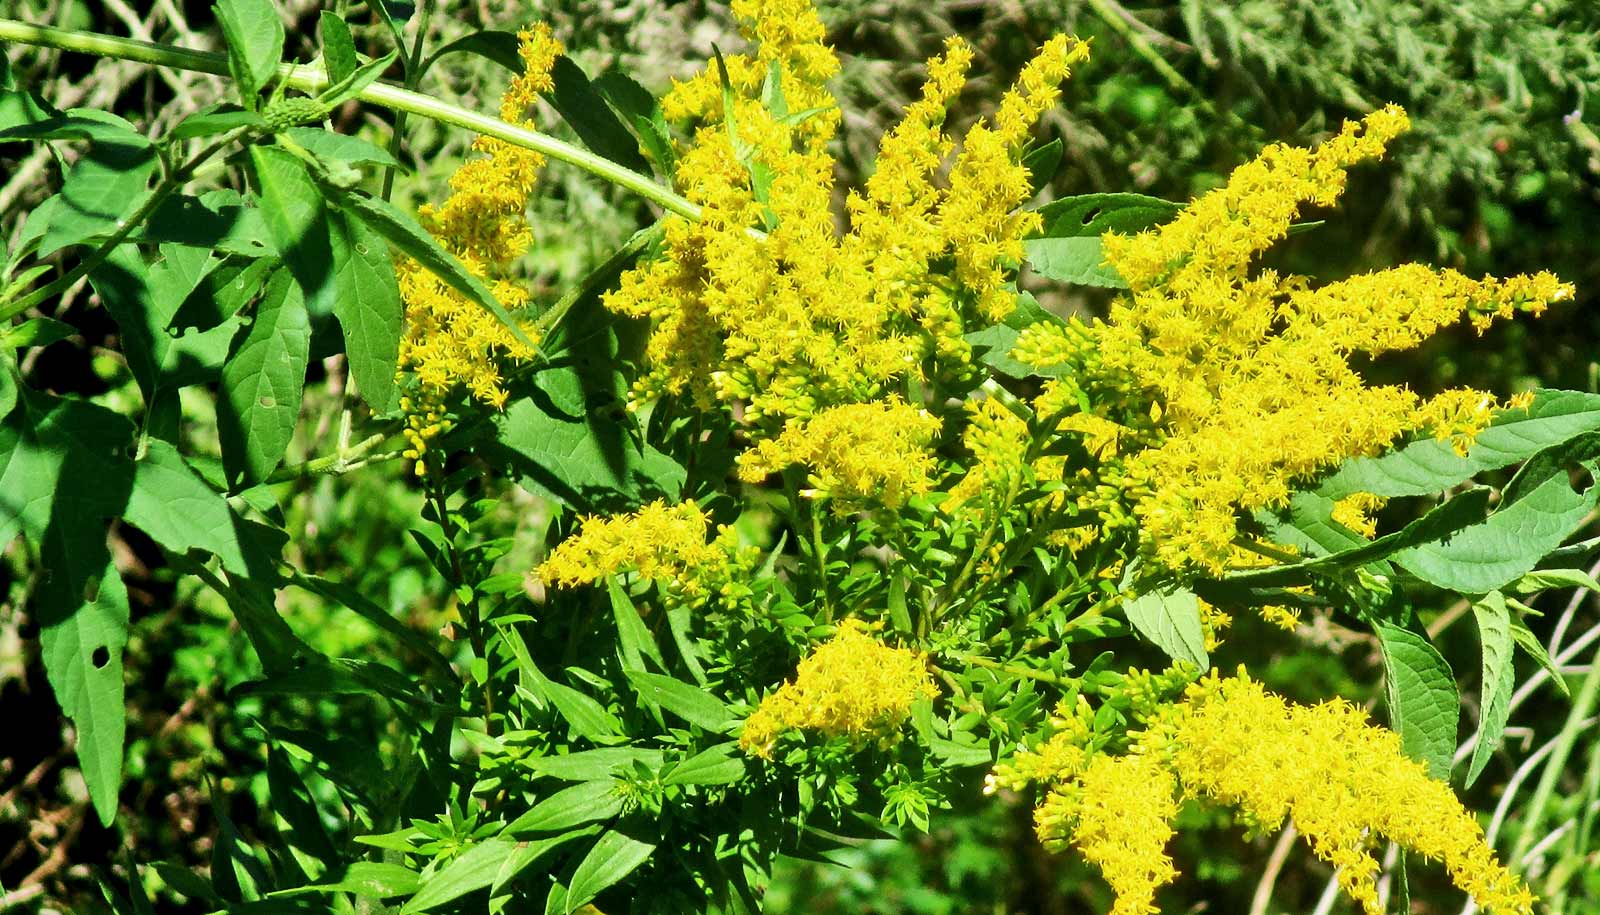 A tall goldenrod plant with green leaves and yellow flowers.